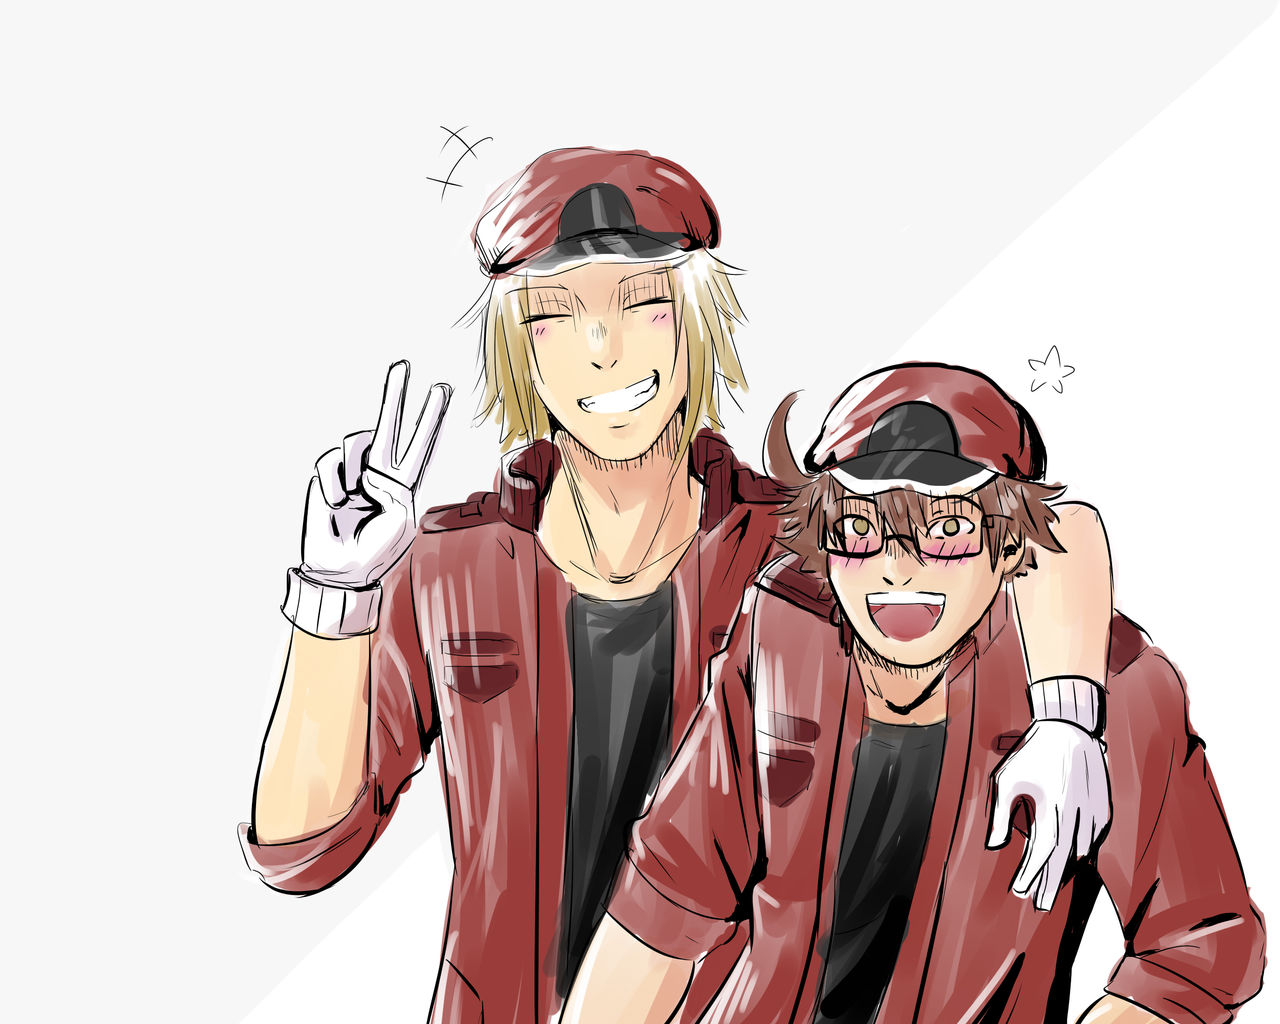 Cells at Work! CODE BLACK: AA2153 & AC1677's Friendship Is Put To